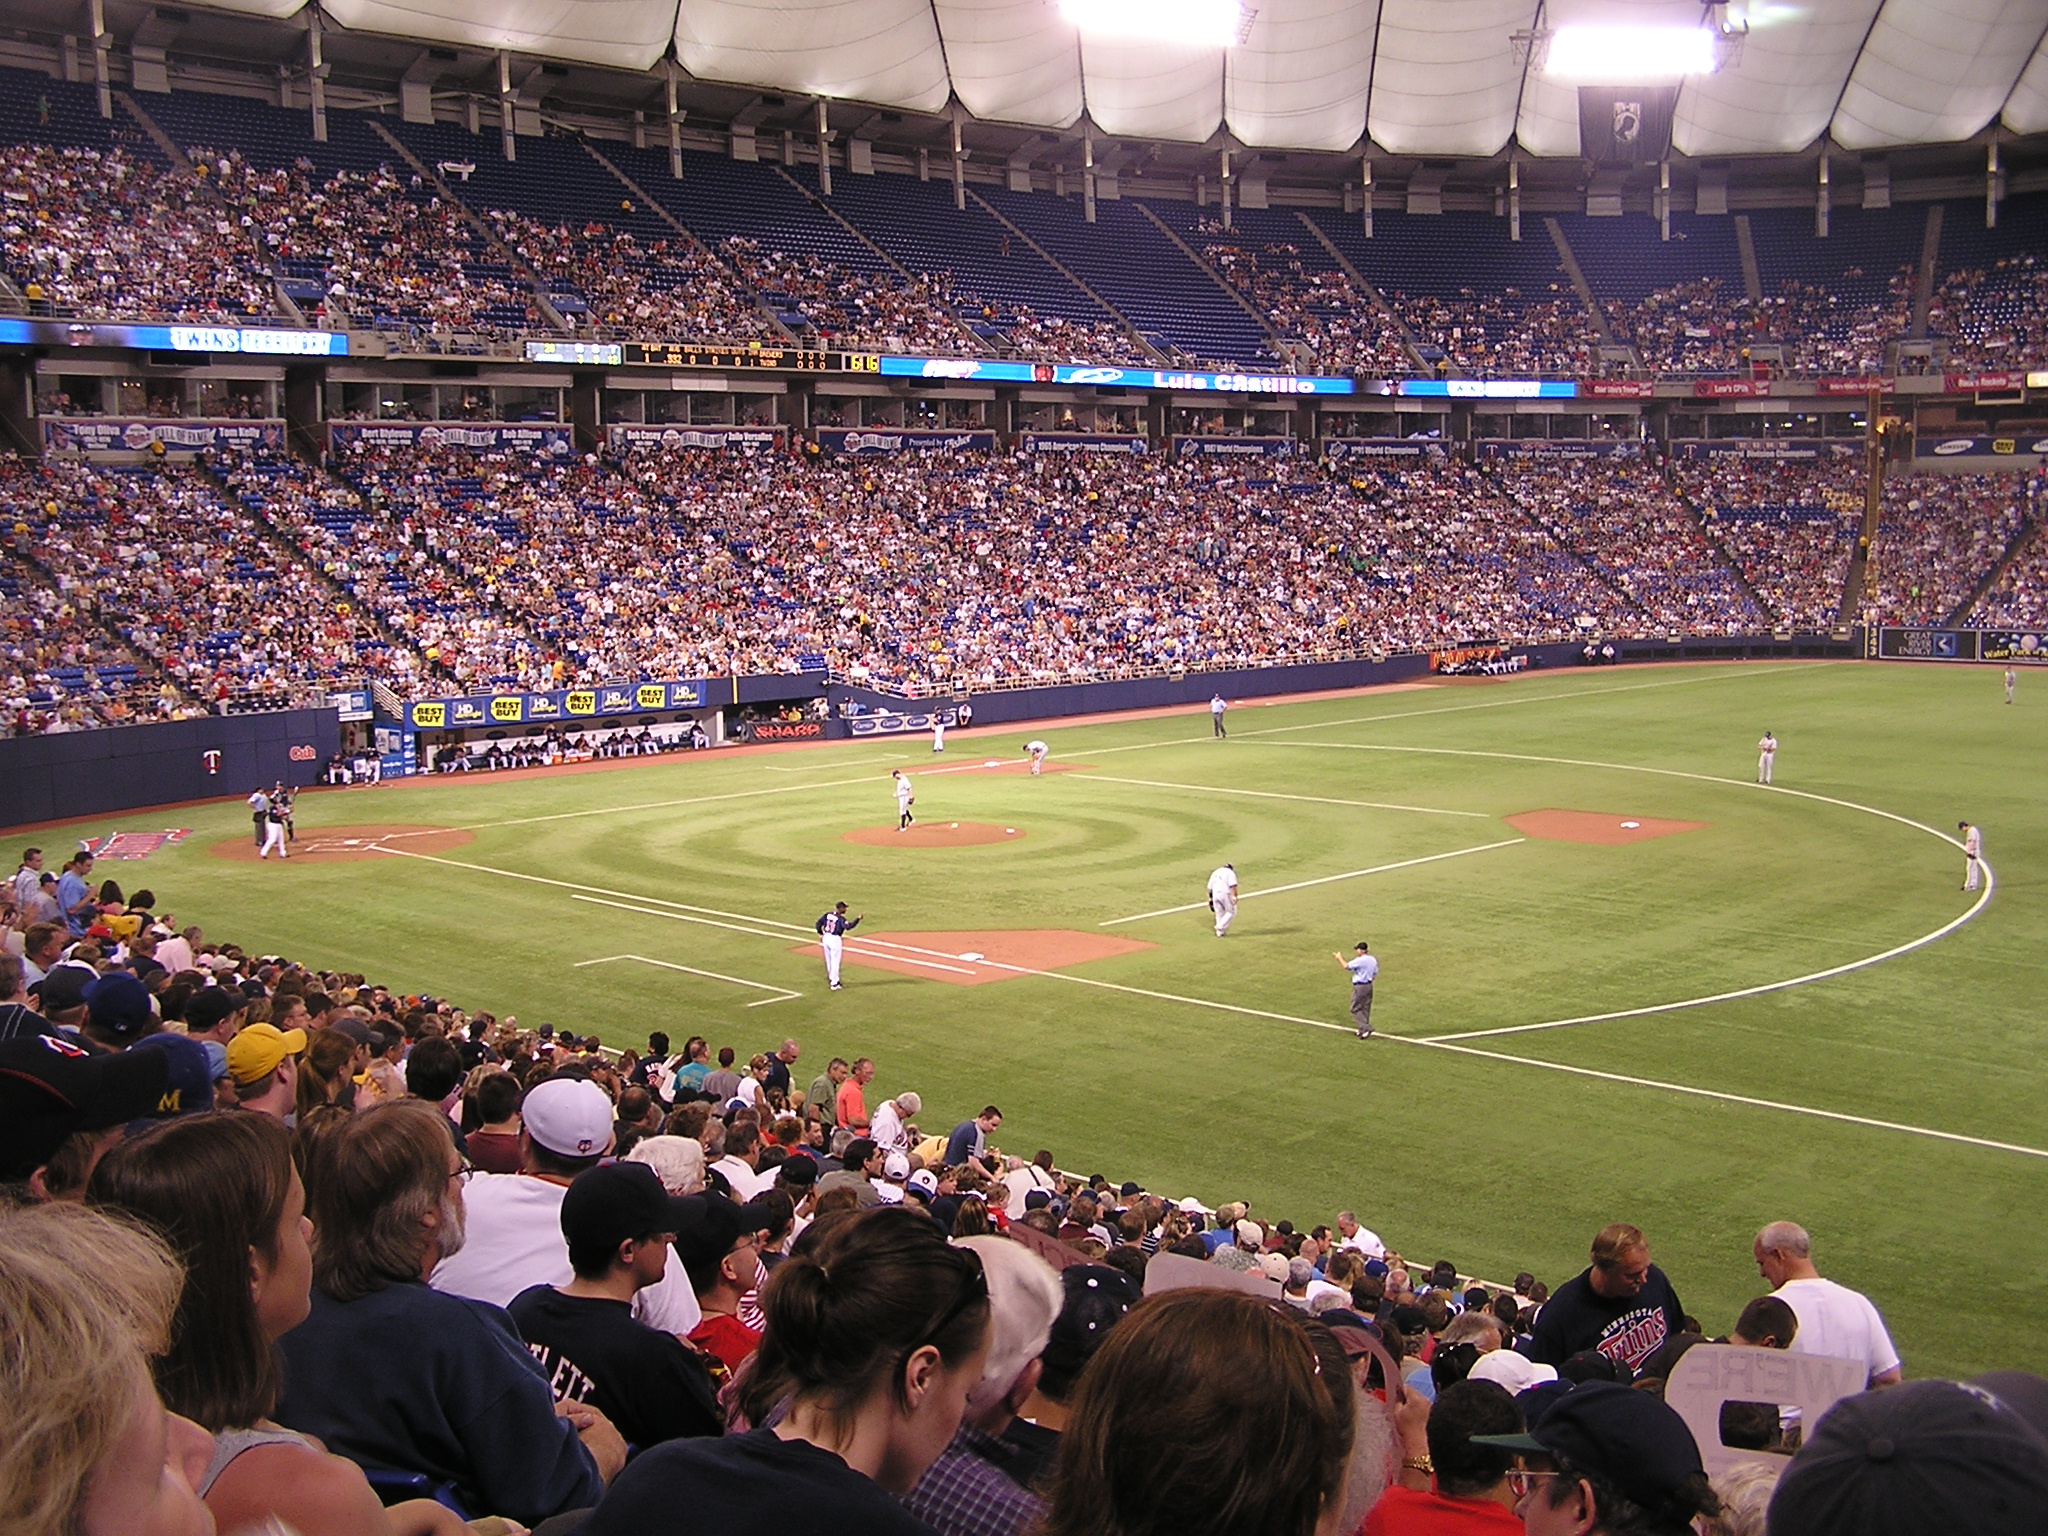 The HHH Metrodome from the 1st base side